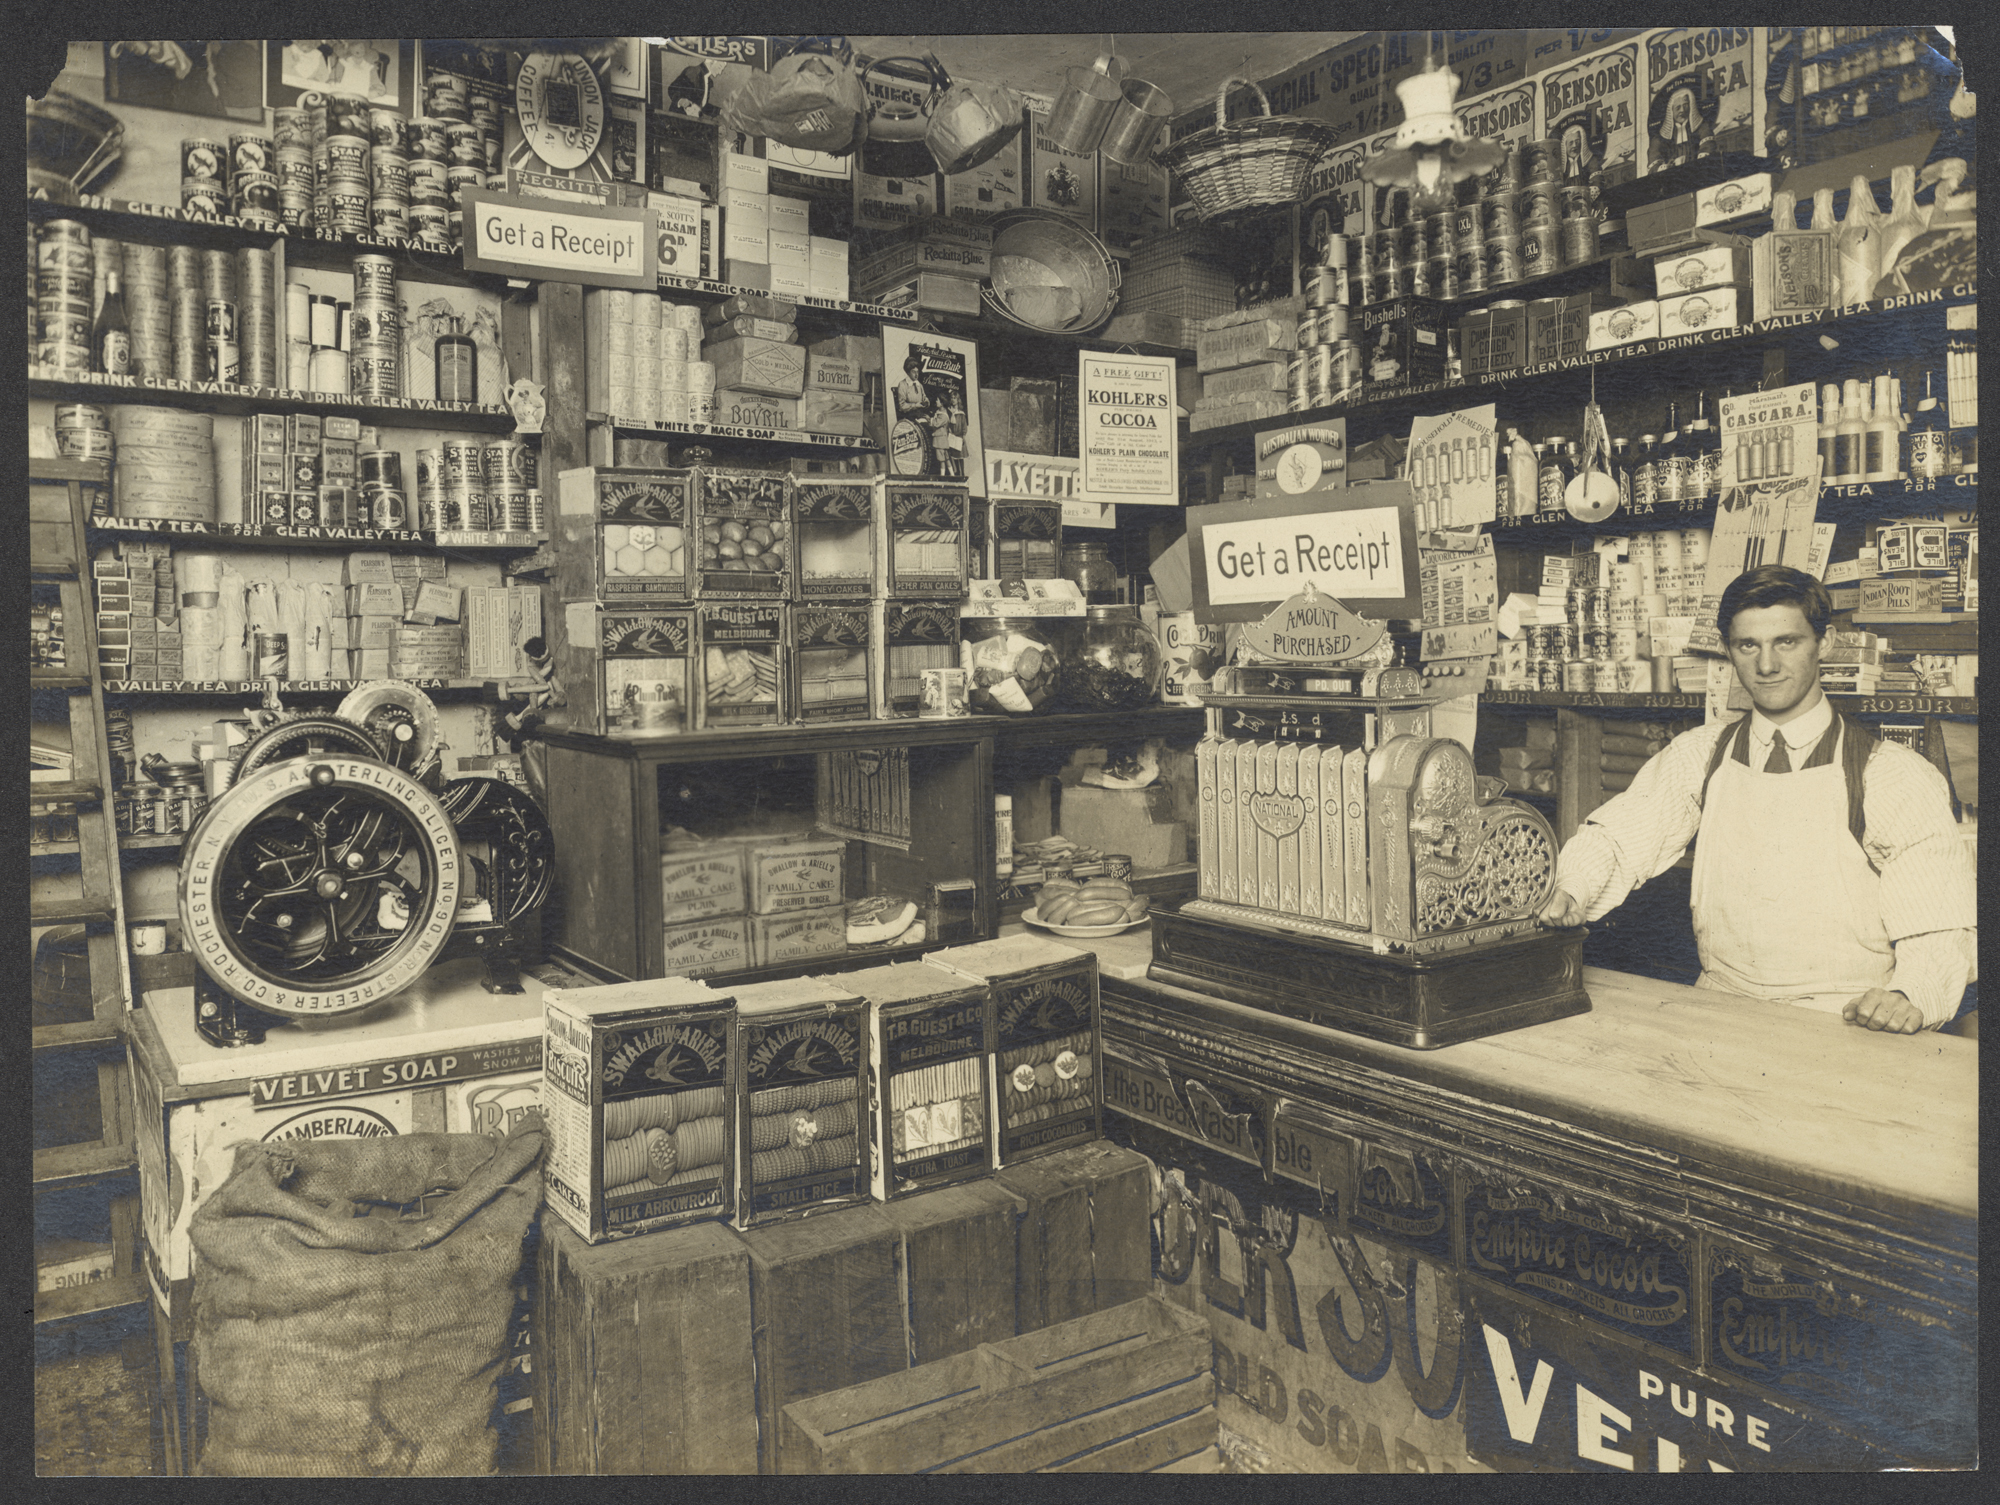 Shop interior, Benjamin Bolton, Family Grocer,  Port Melbourne, about 1913  photograph by Algernon Darge  State Library of Victoria